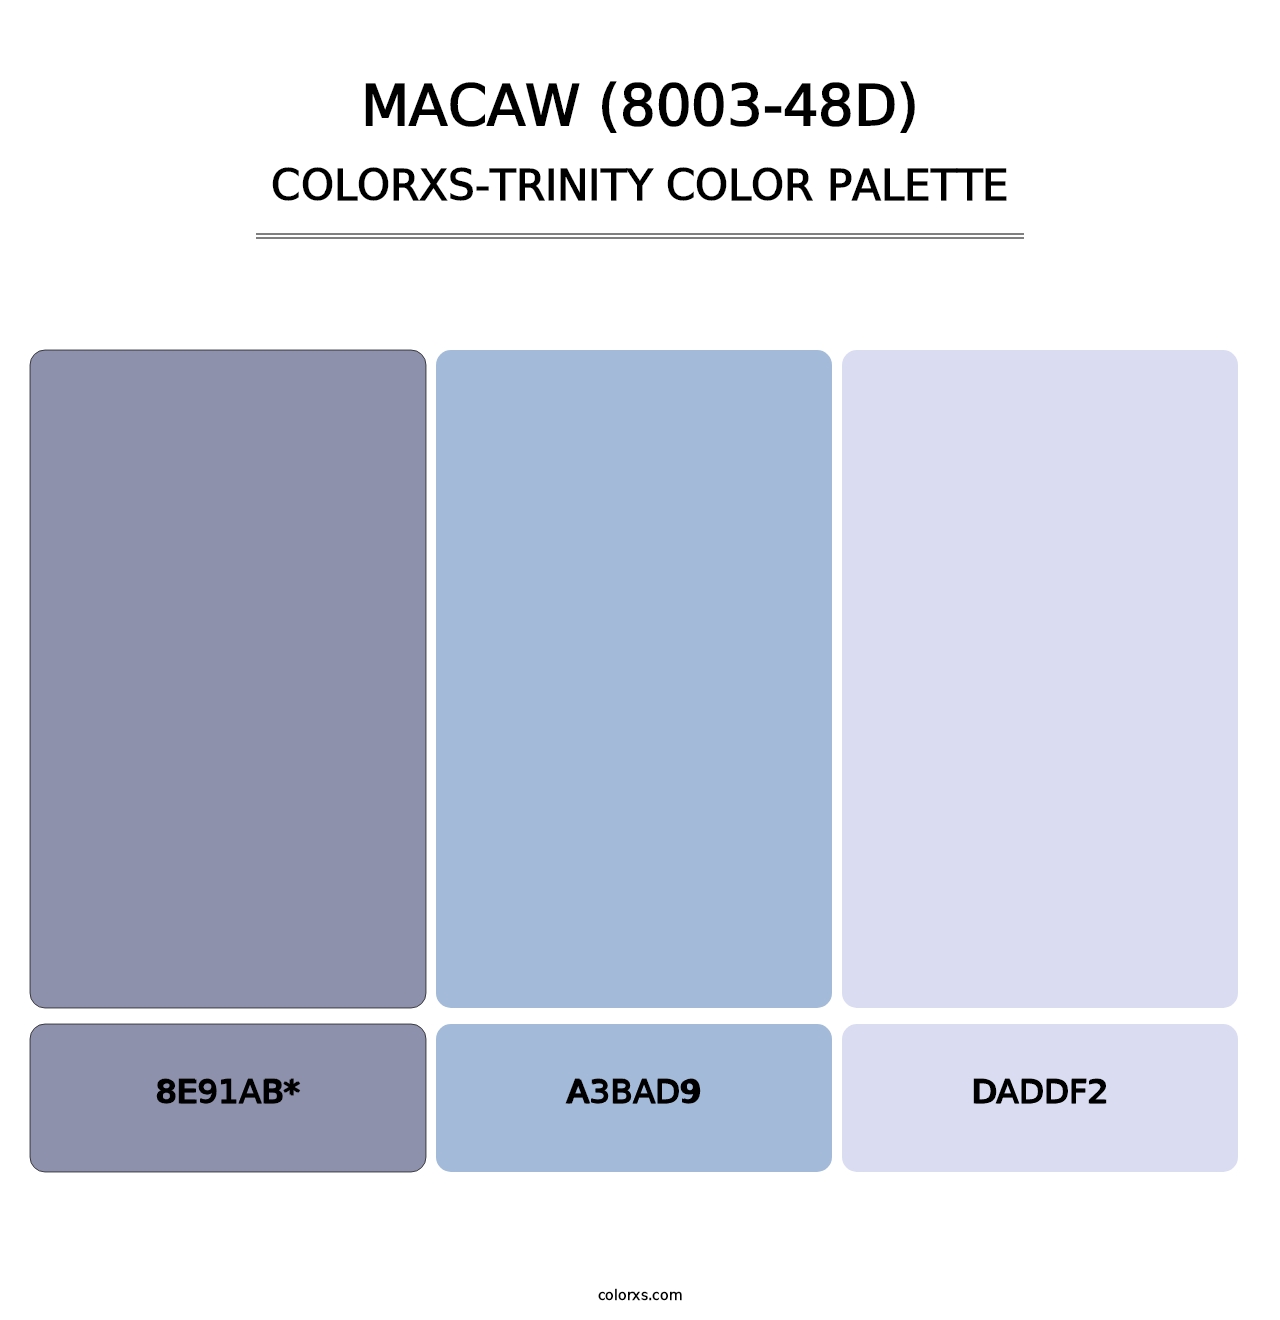 Macaw (8003-48D) - Colorxs Trinity Palette